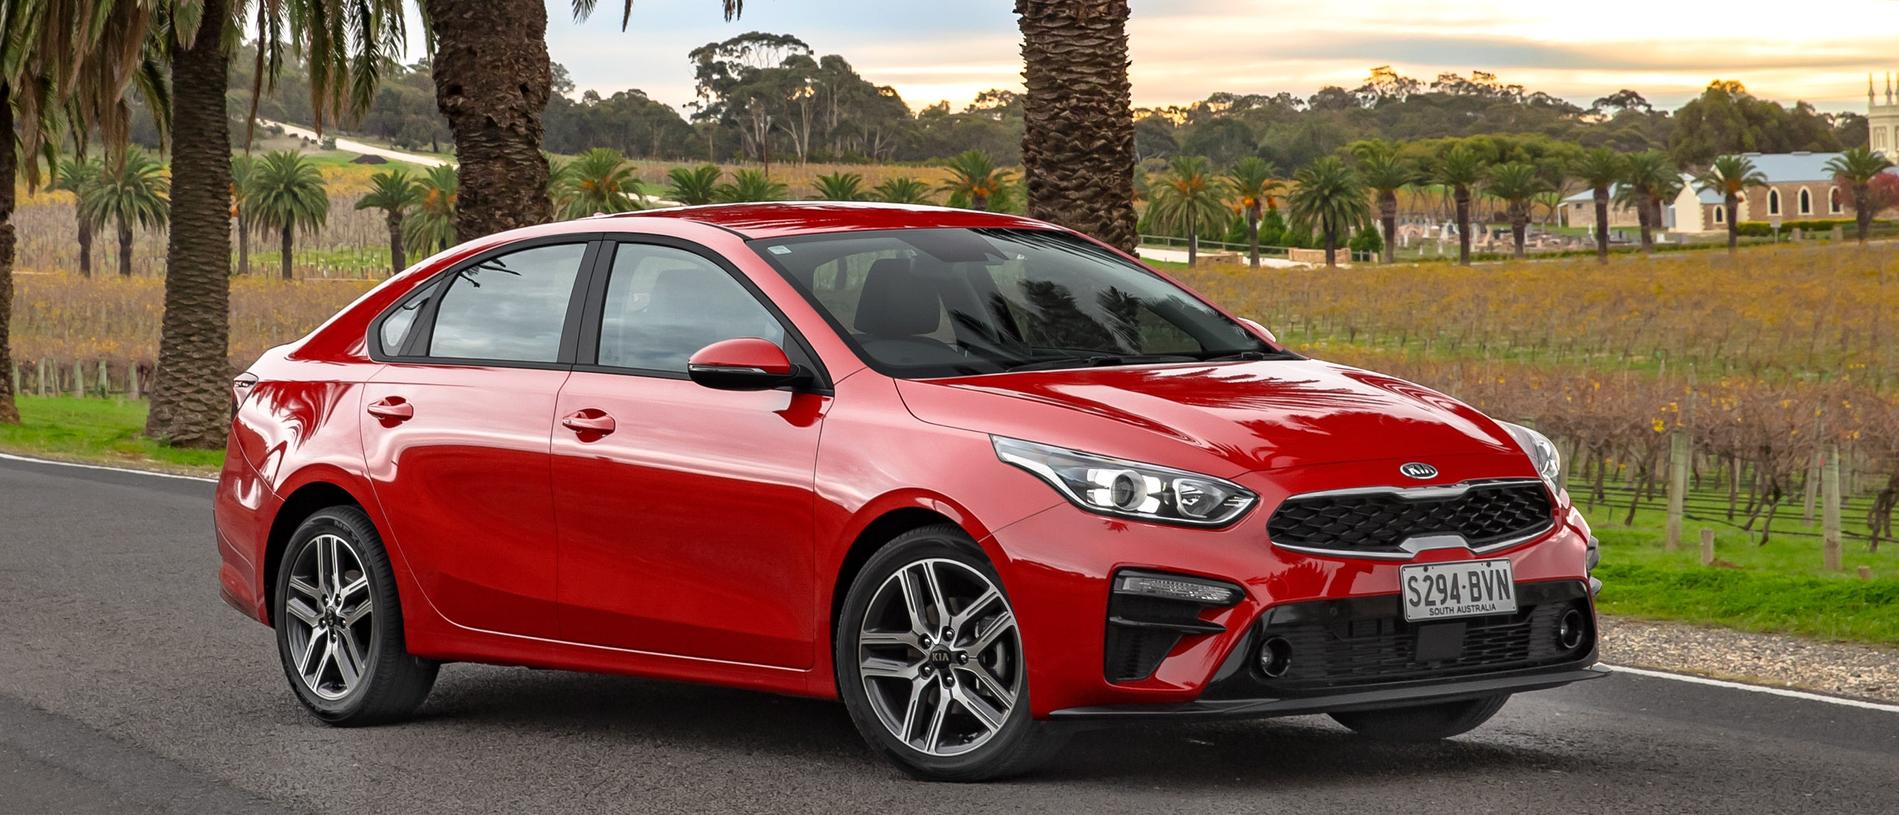 Kia Cerato Sport Plus: Reviewed and prices | The Courier Mail